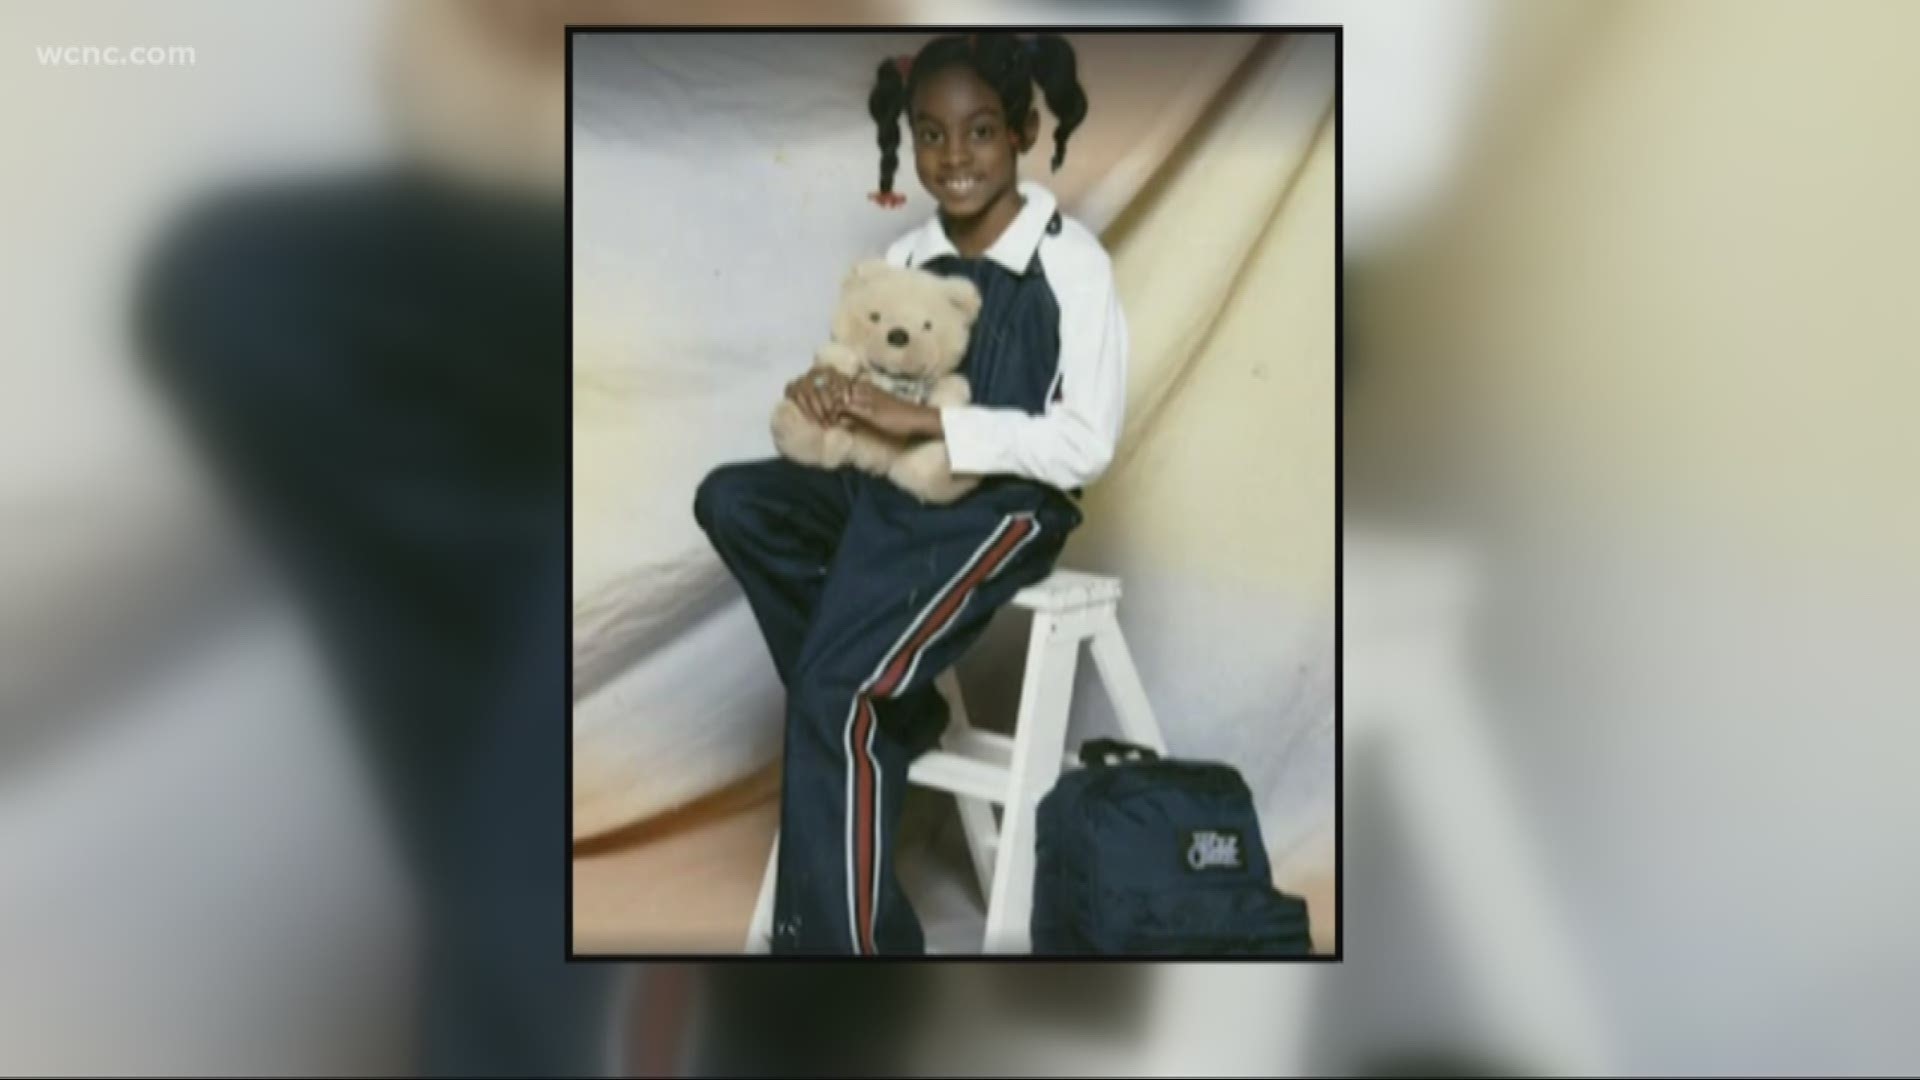 Police are offering new clues in the 18-year-old cold case of Asha Degree's disappearance. 